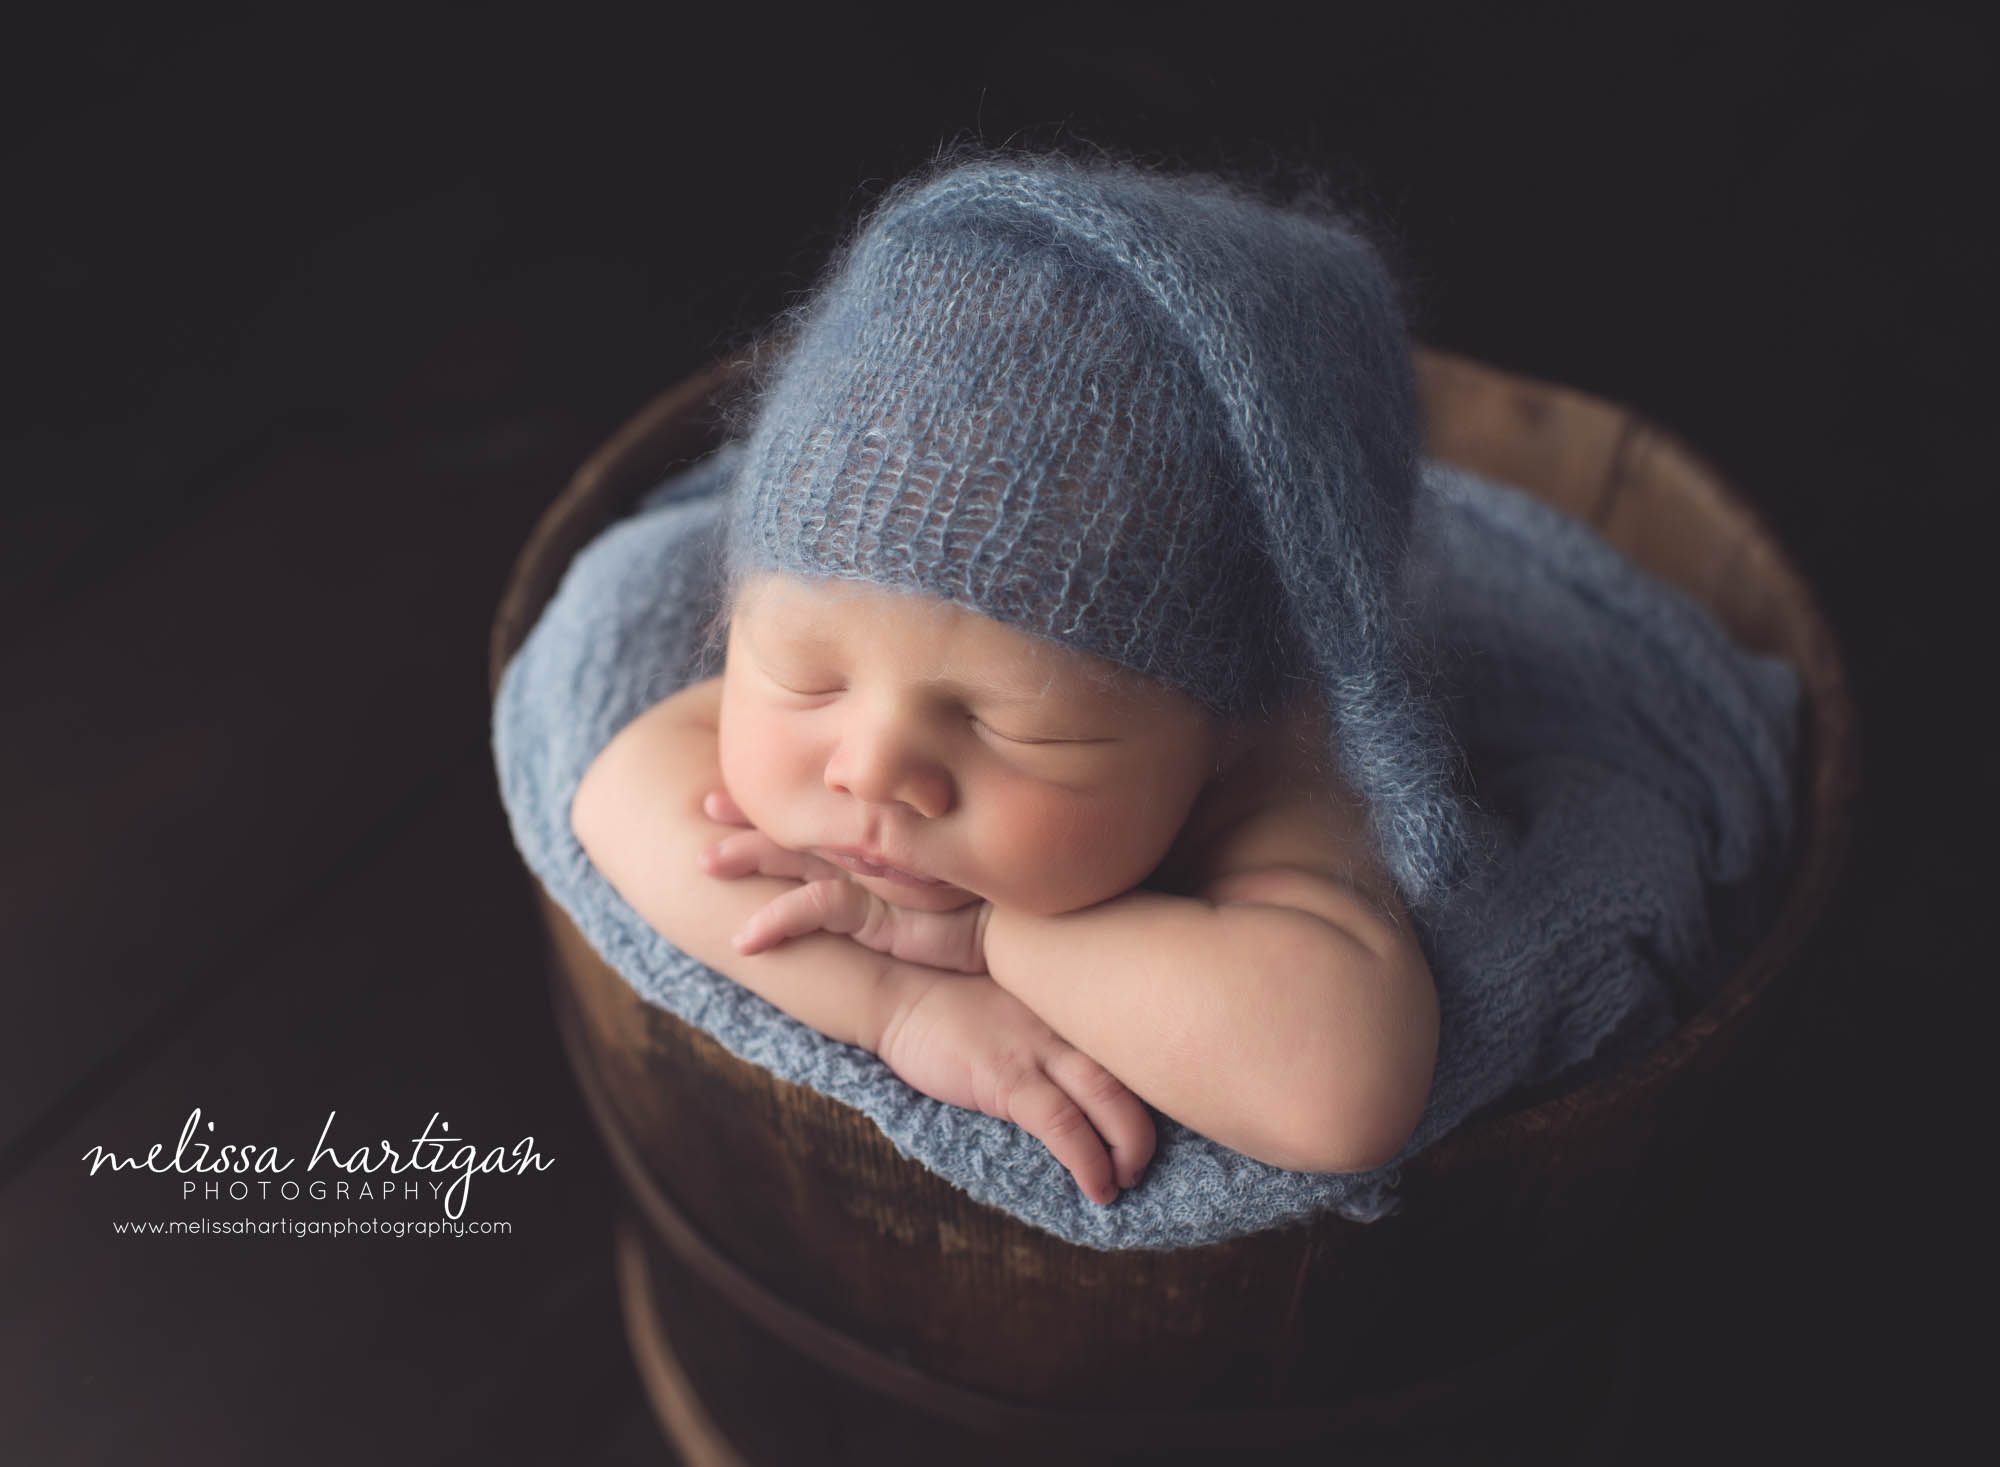 Melissa Hartigan Photography CT Newborn Photographer Braeden Newborn Session baby boy sleeping in wooden bucket wearing blue knit hat with blue knit blanket head on crossed arms